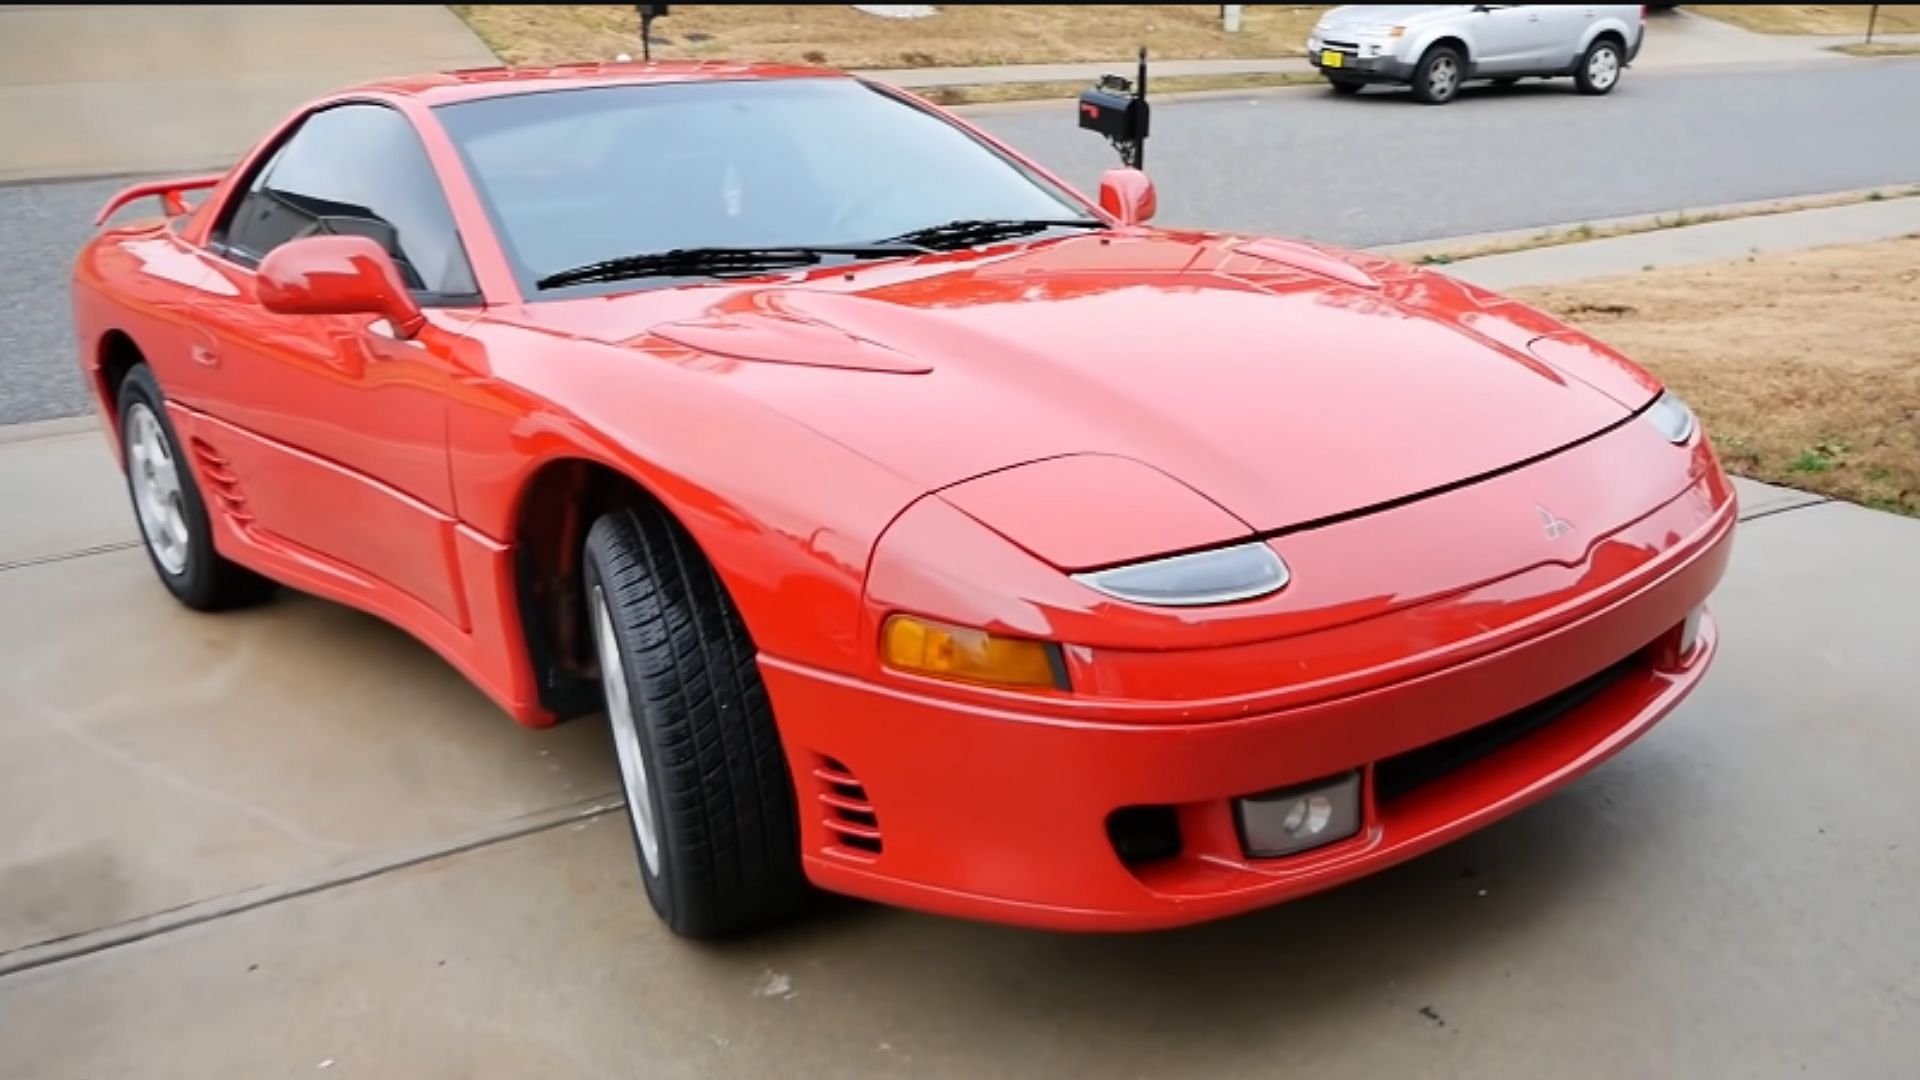 The 3000GT (Image via YouTube/Capt Two6)